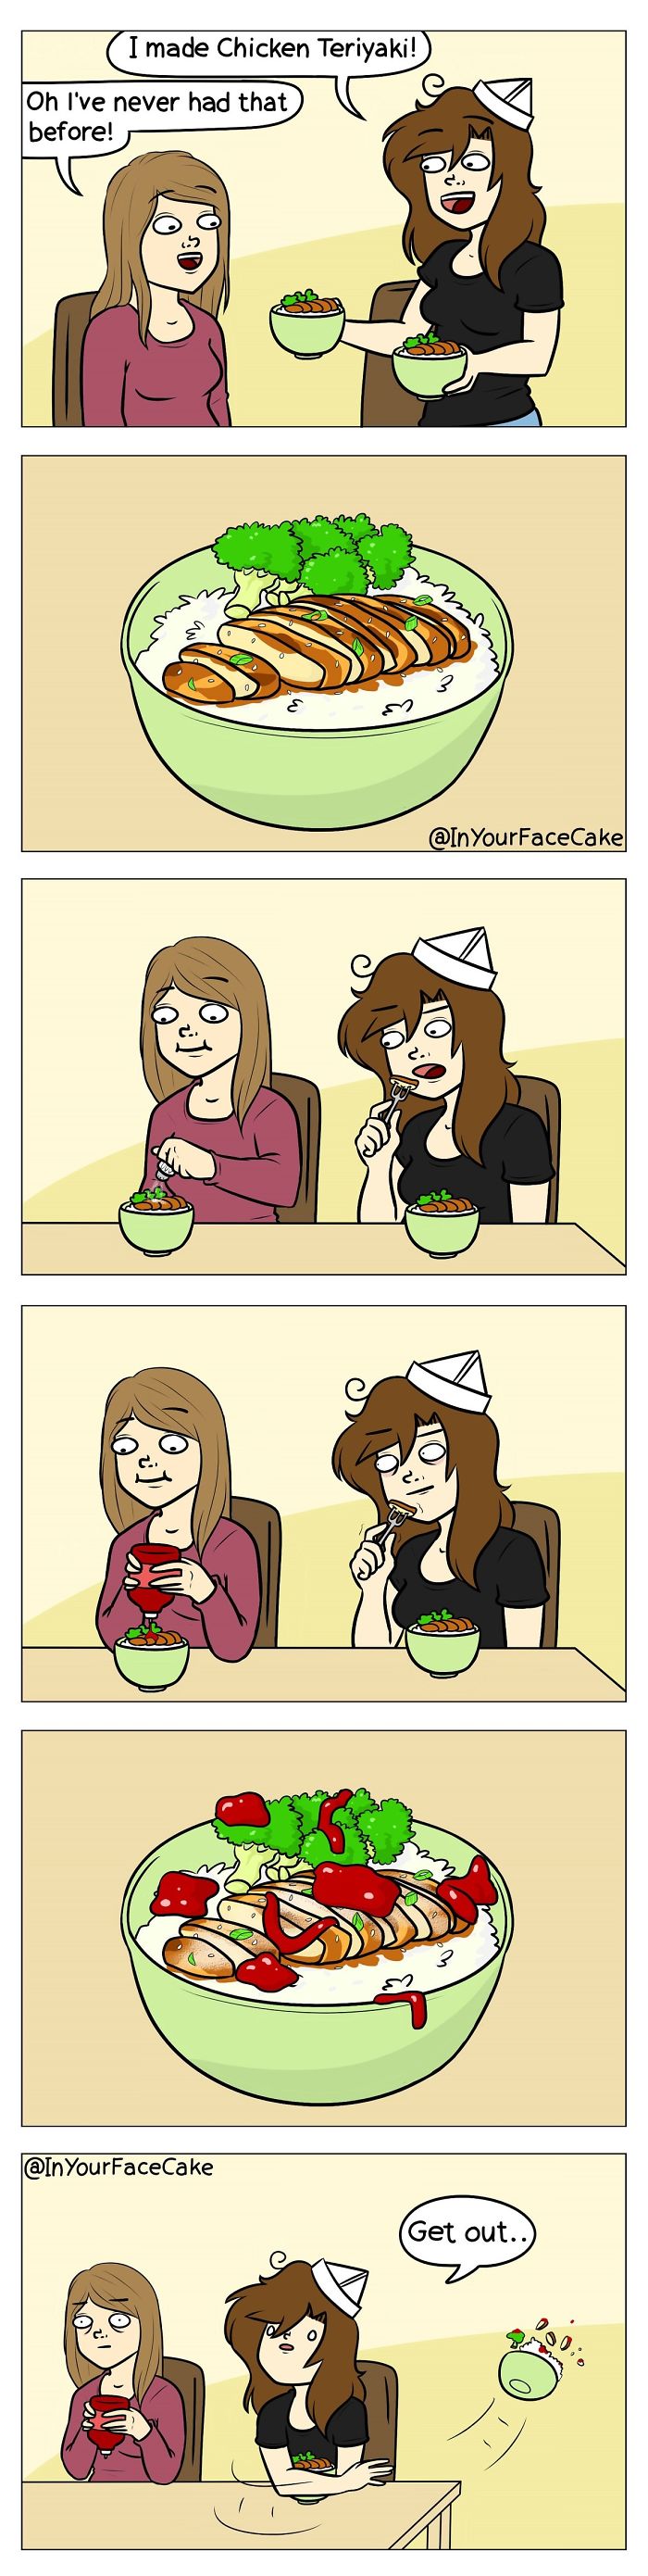 New-In-You-Face-Cake-Comics